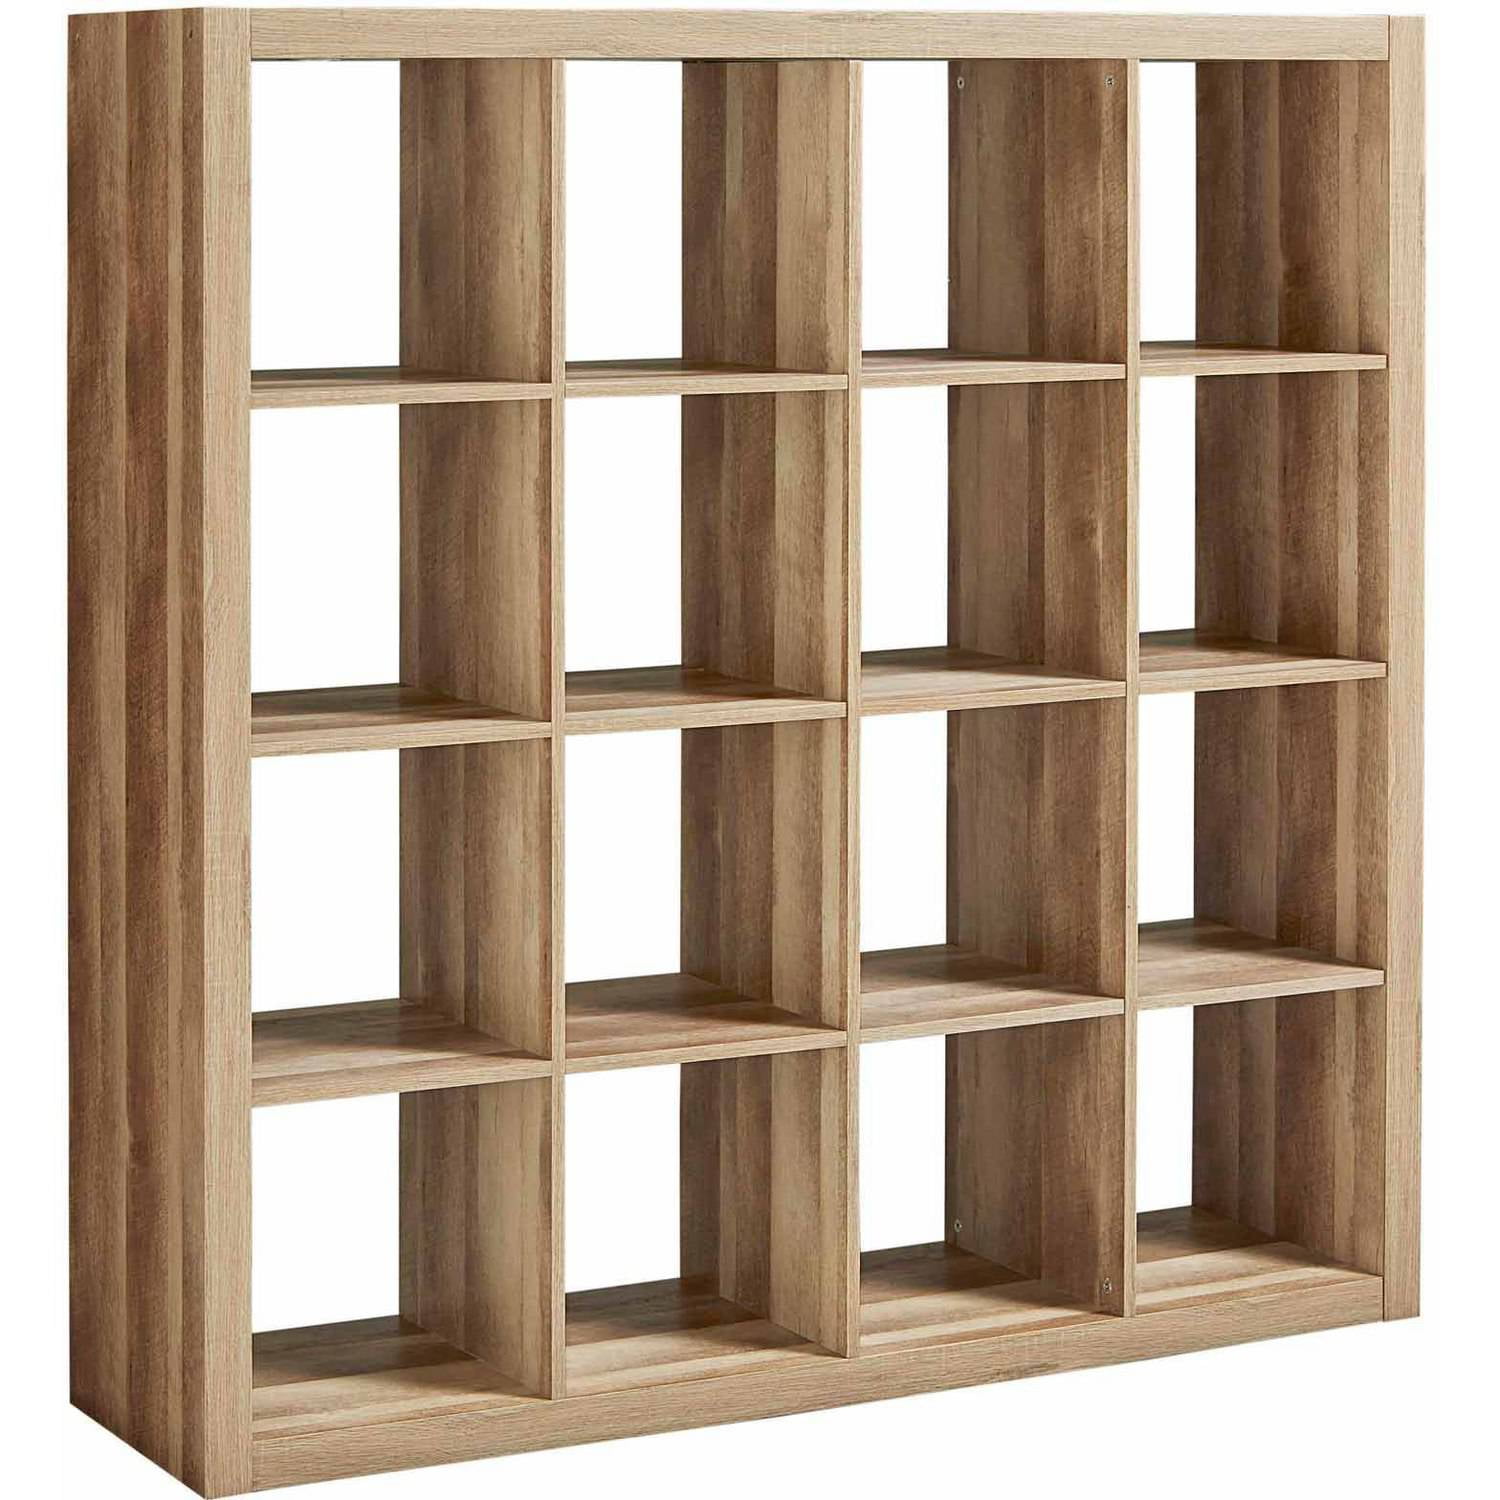 Better Homes Gardens 16-Cube Square Storage Organizer, Multiple Finishes, Size Large 57.40 x W 15.35 x H 56.85